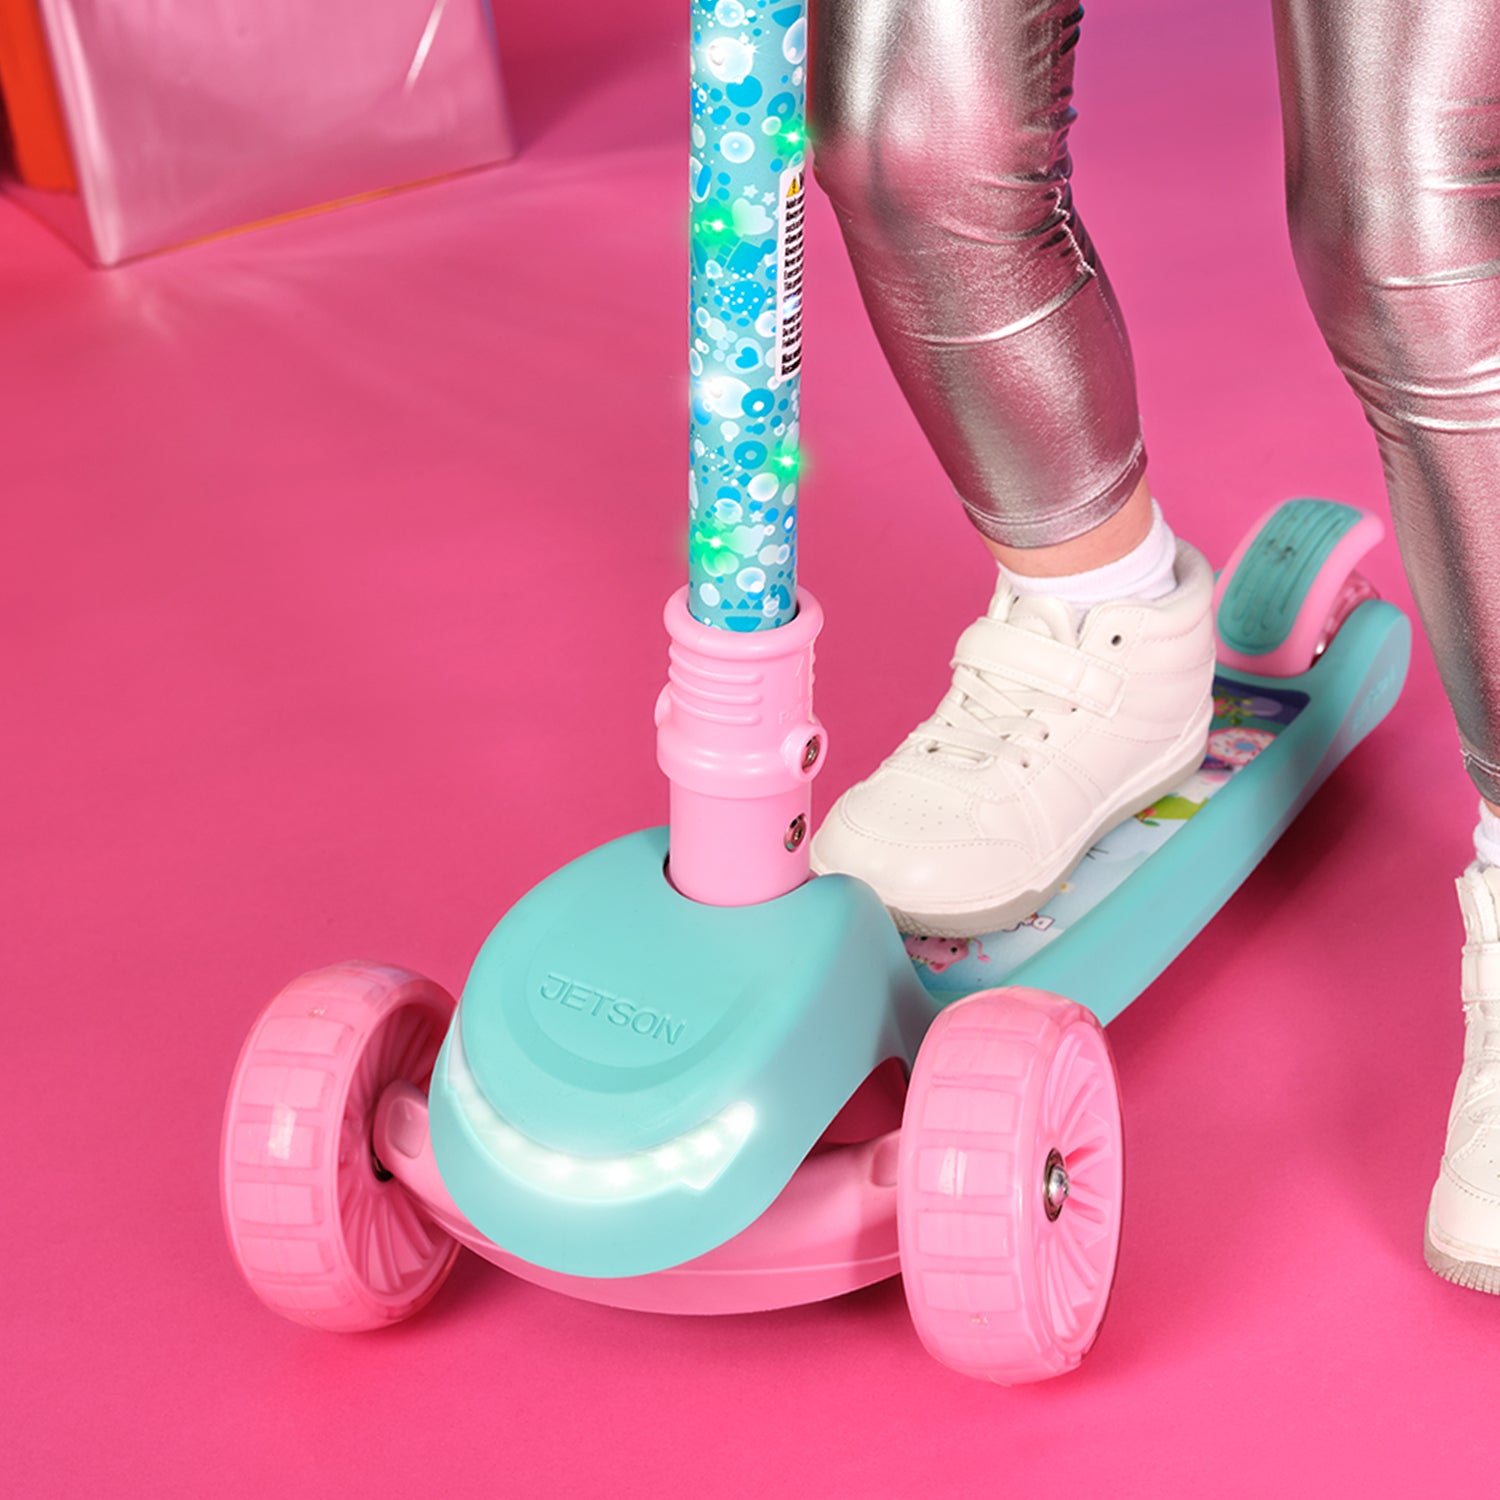 close up of a kid's foot on the gabby's dollhouse kick scooter